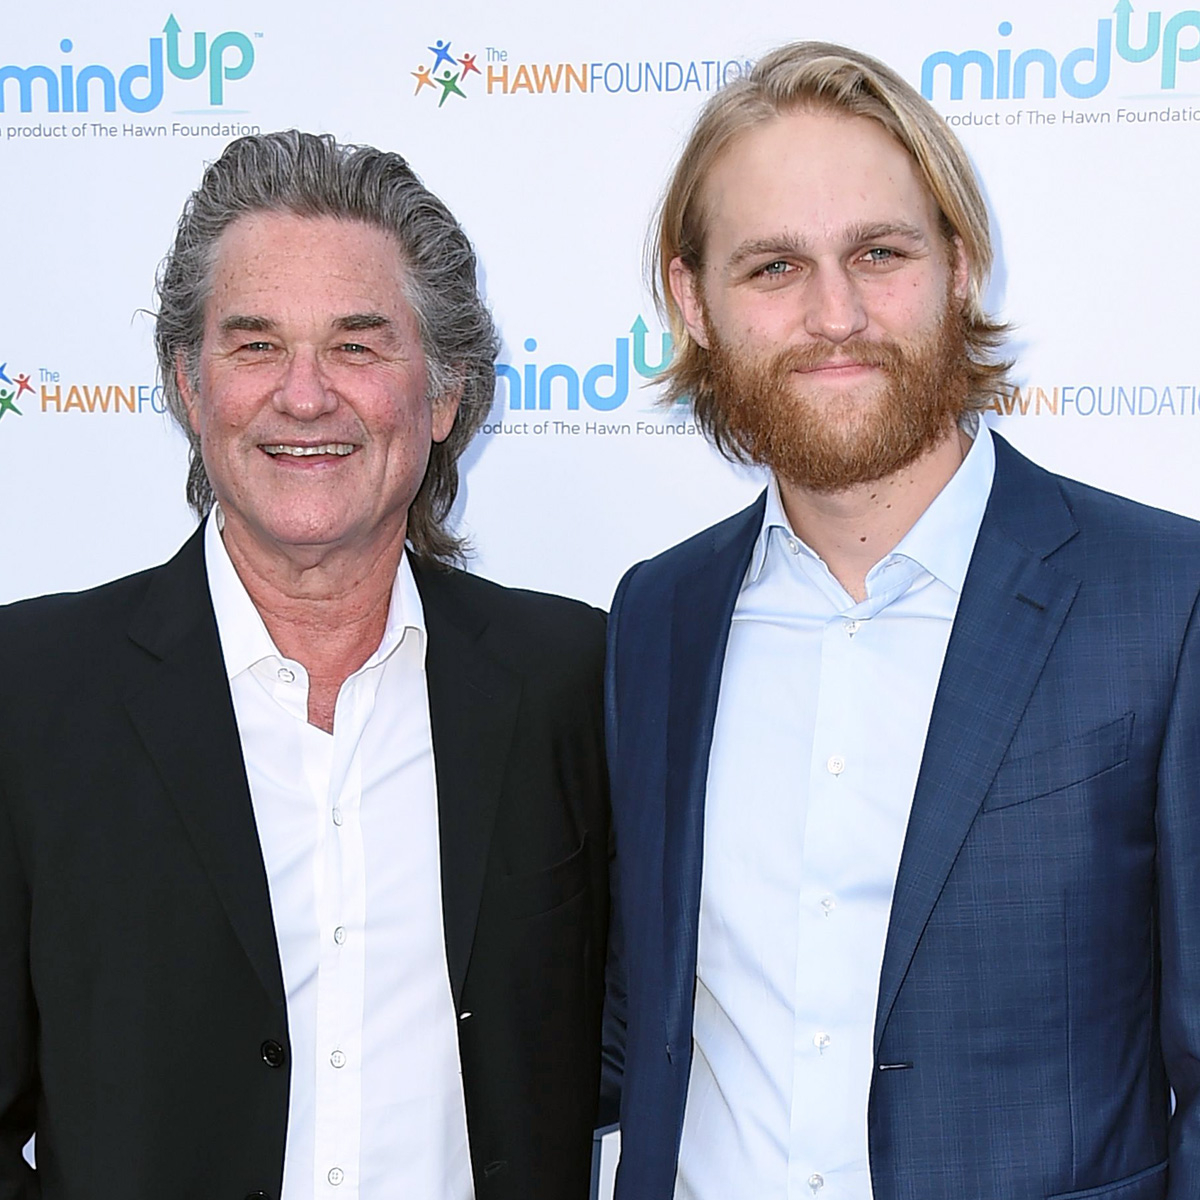 Find Out the Show Bringing Kurt & Wyatt Russell Together